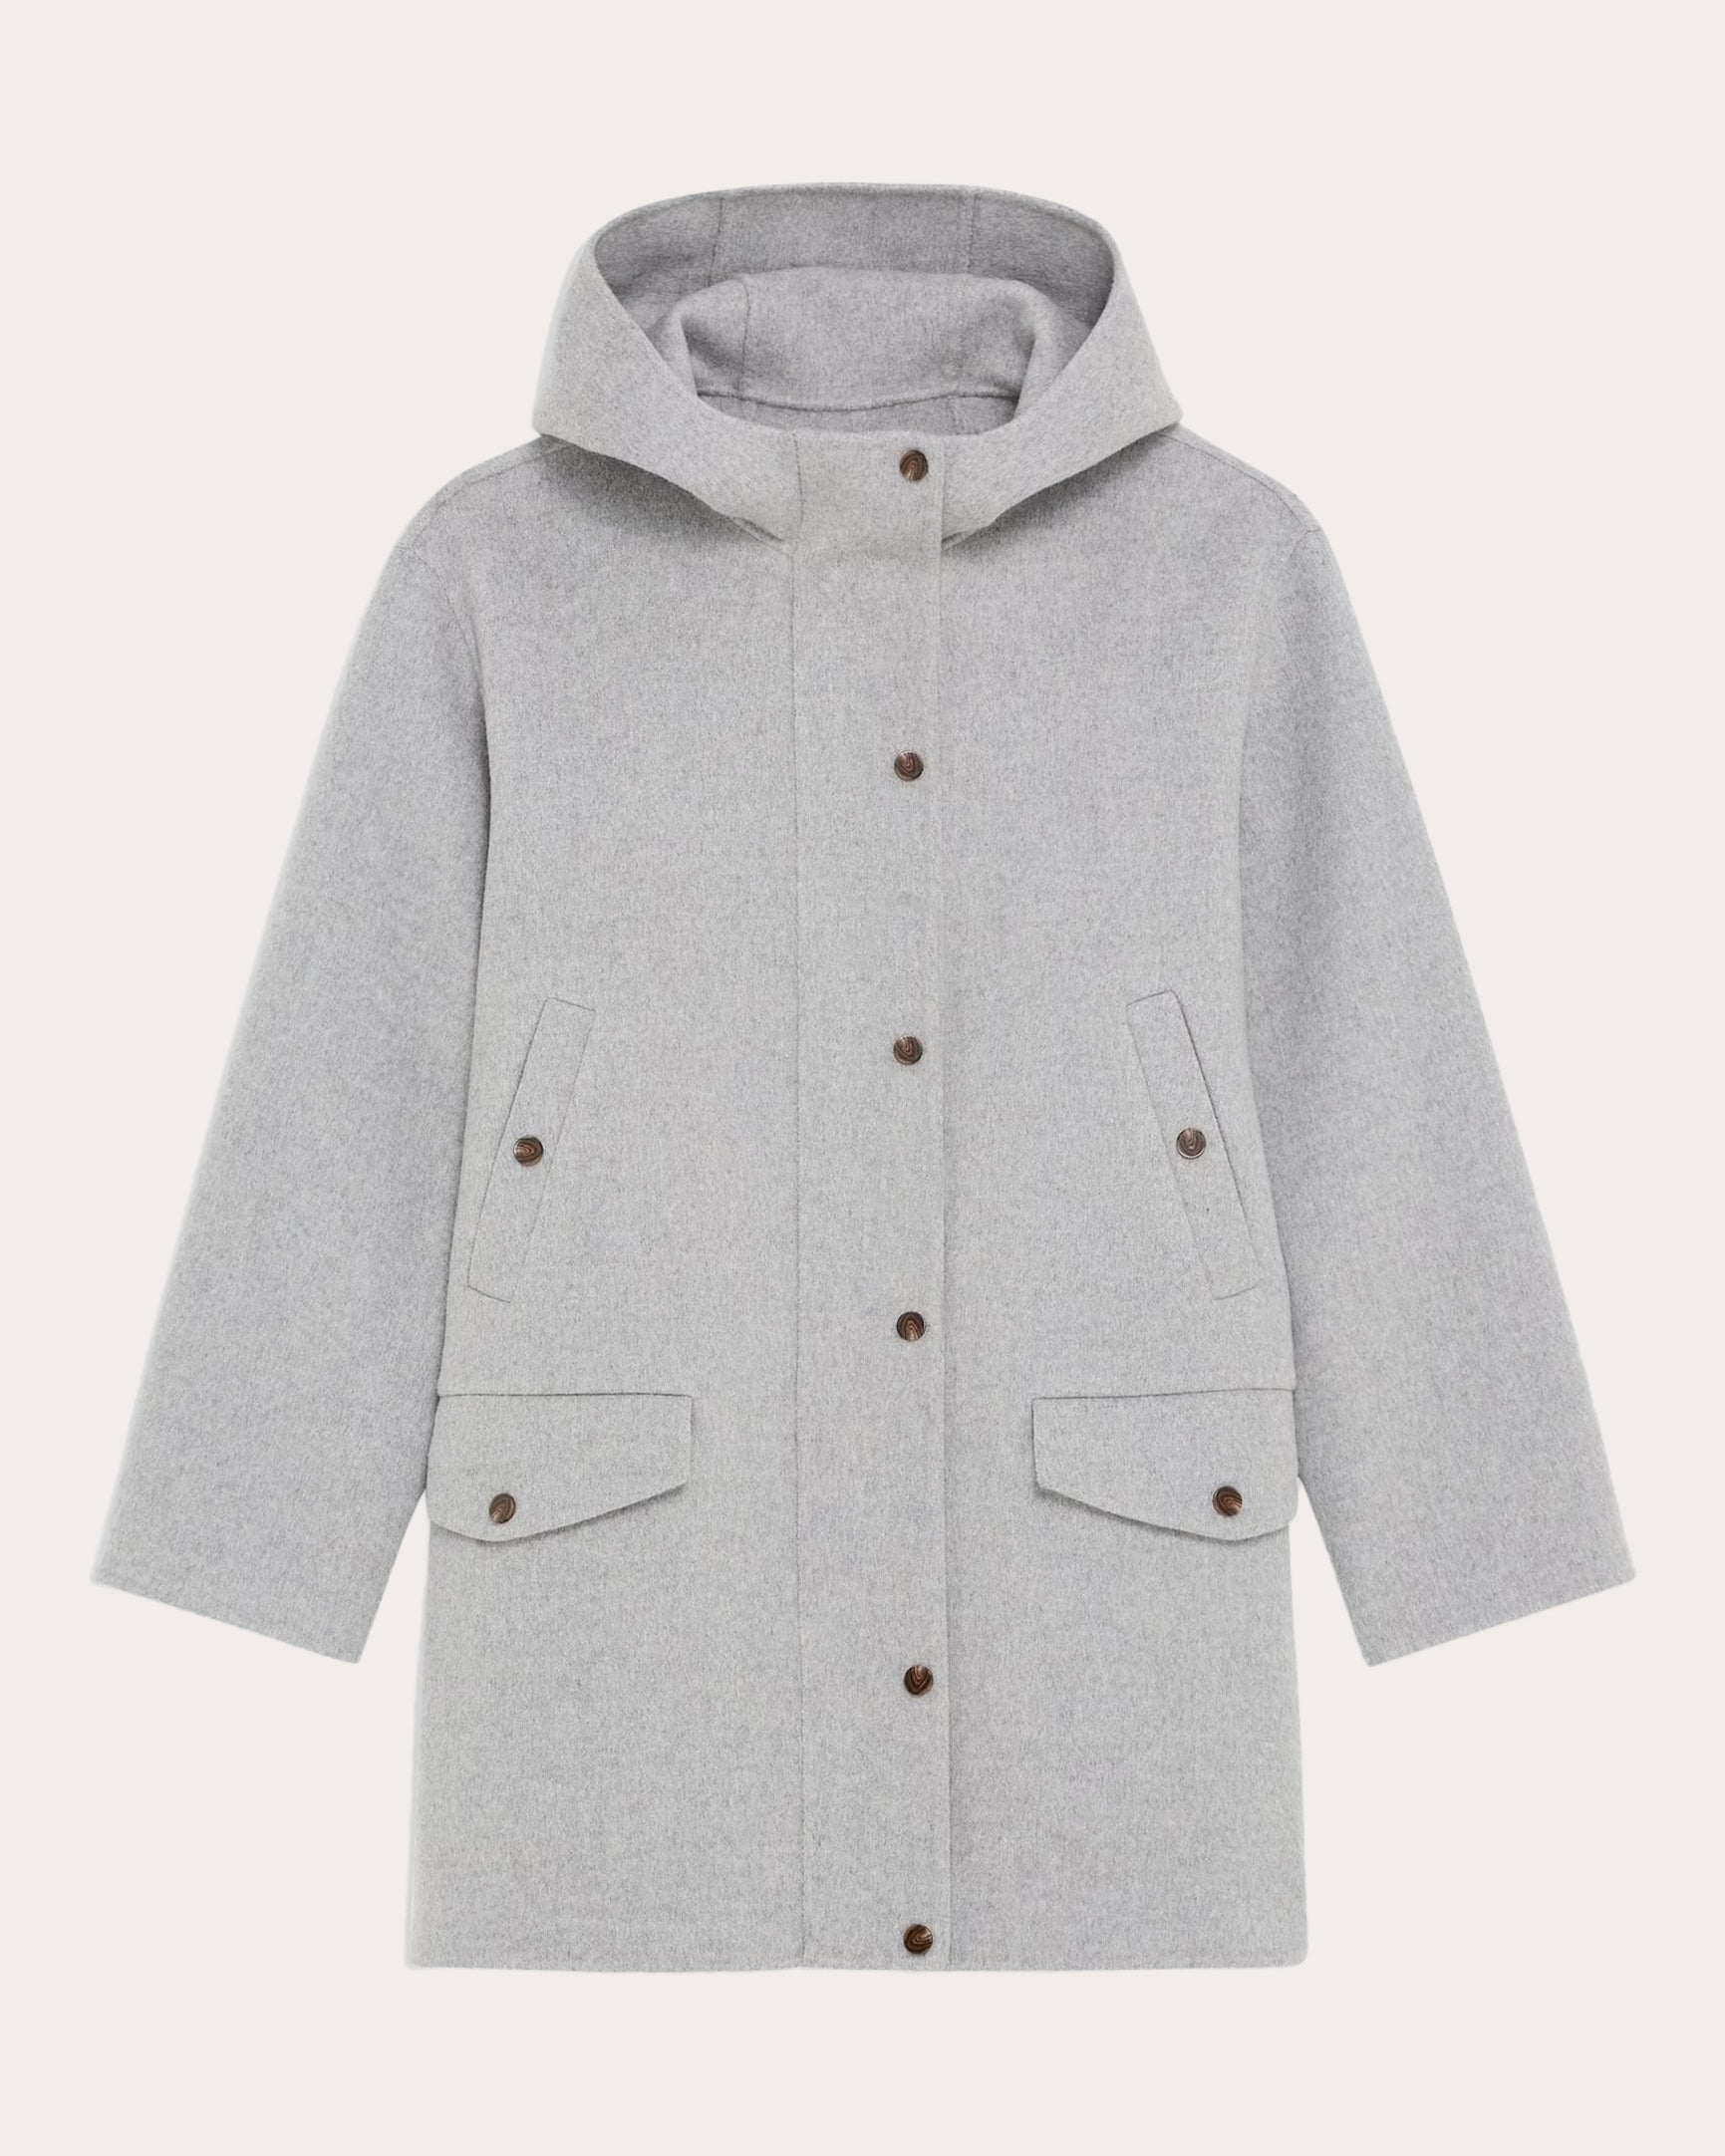 THEORY WOMEN'S DOUBLE-FACED PARKA